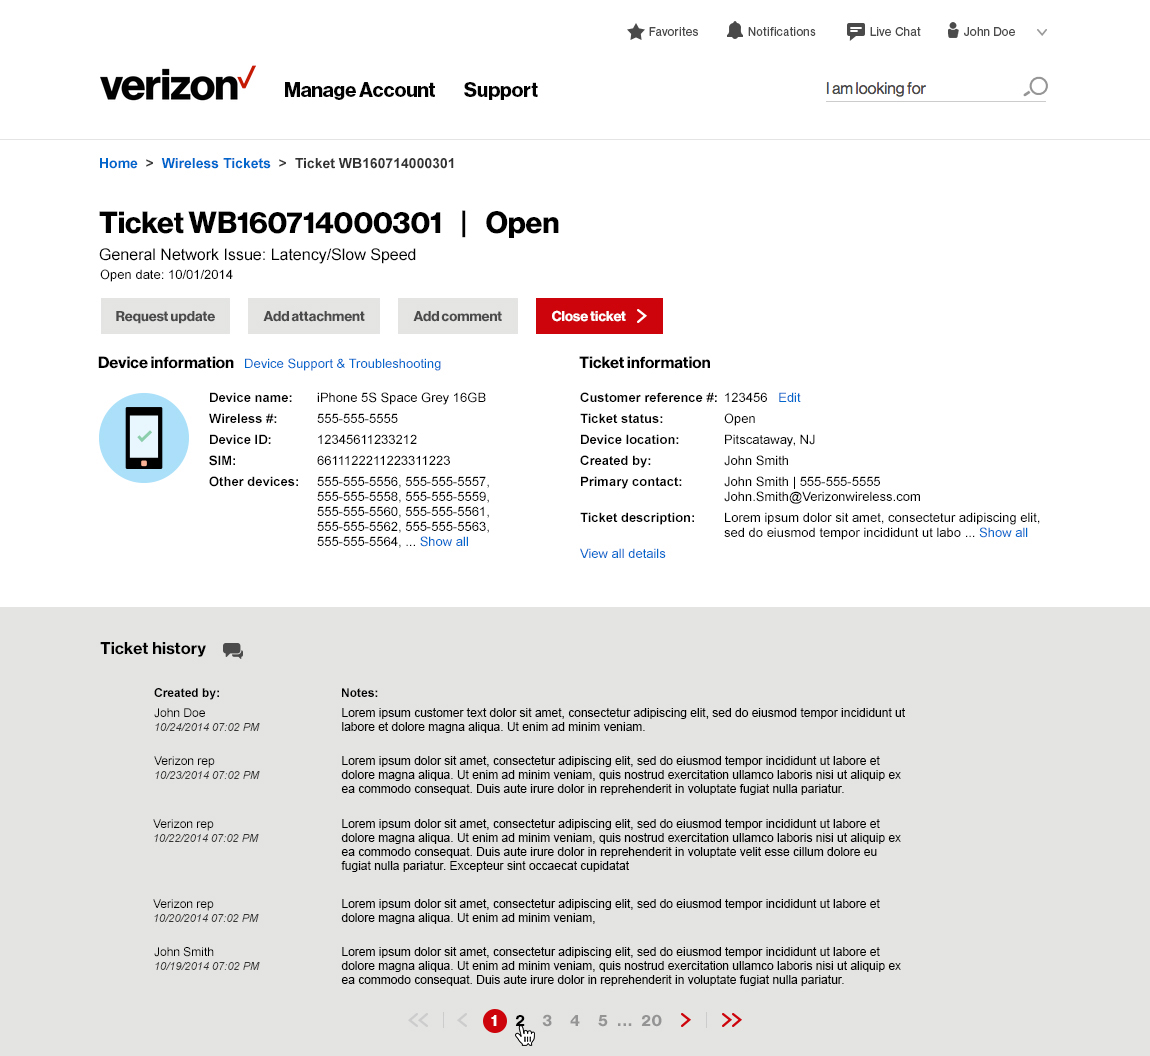 Customer can view the status update in ticket details page